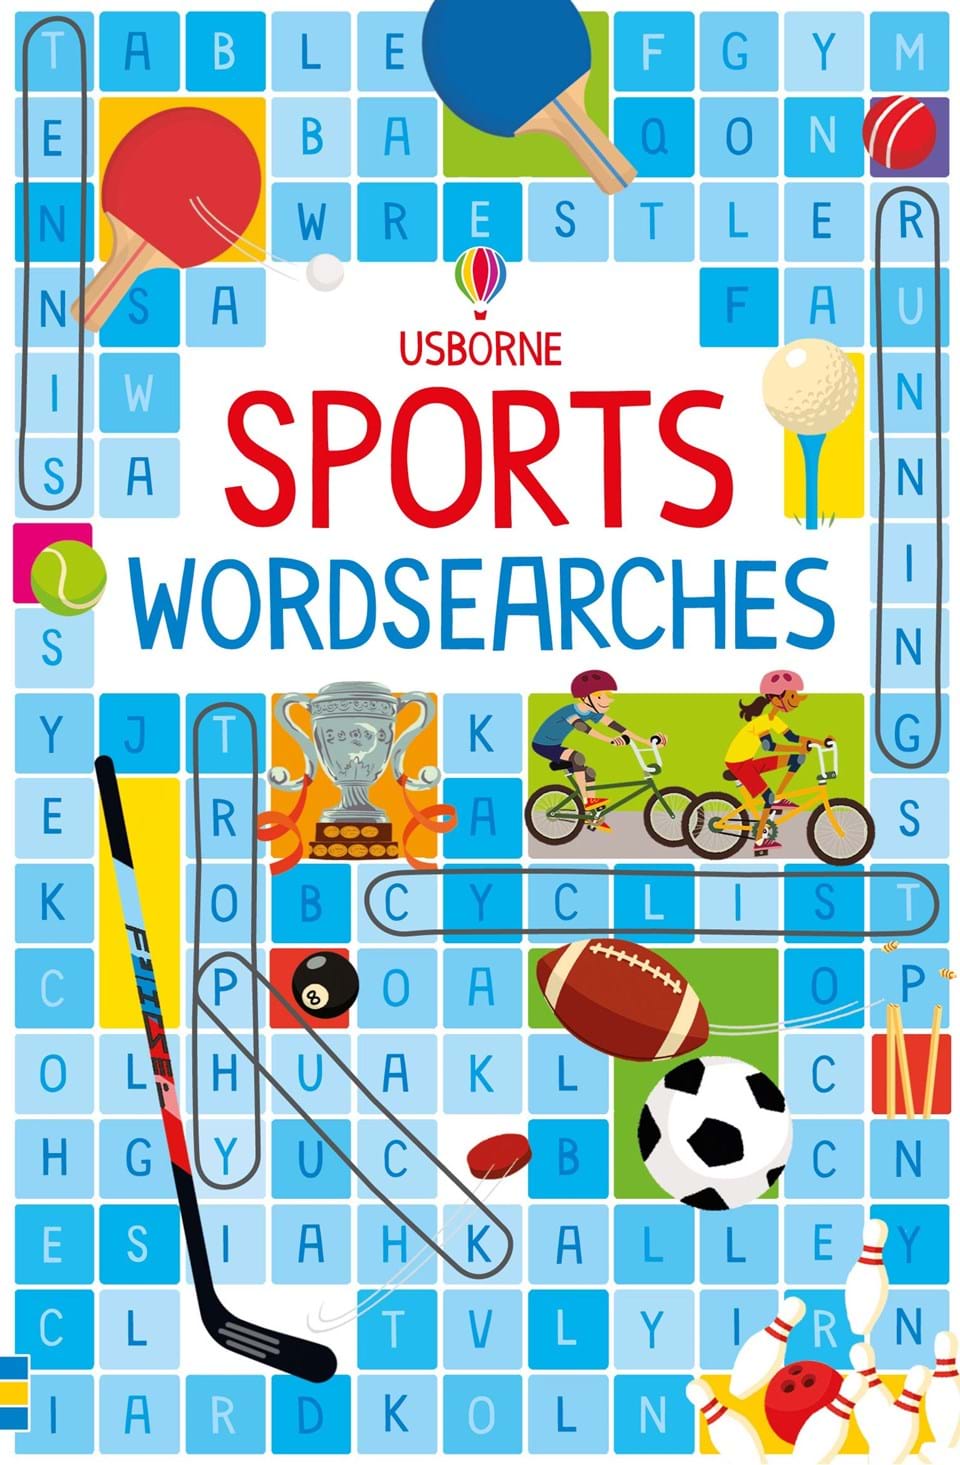 Sports wordsearches